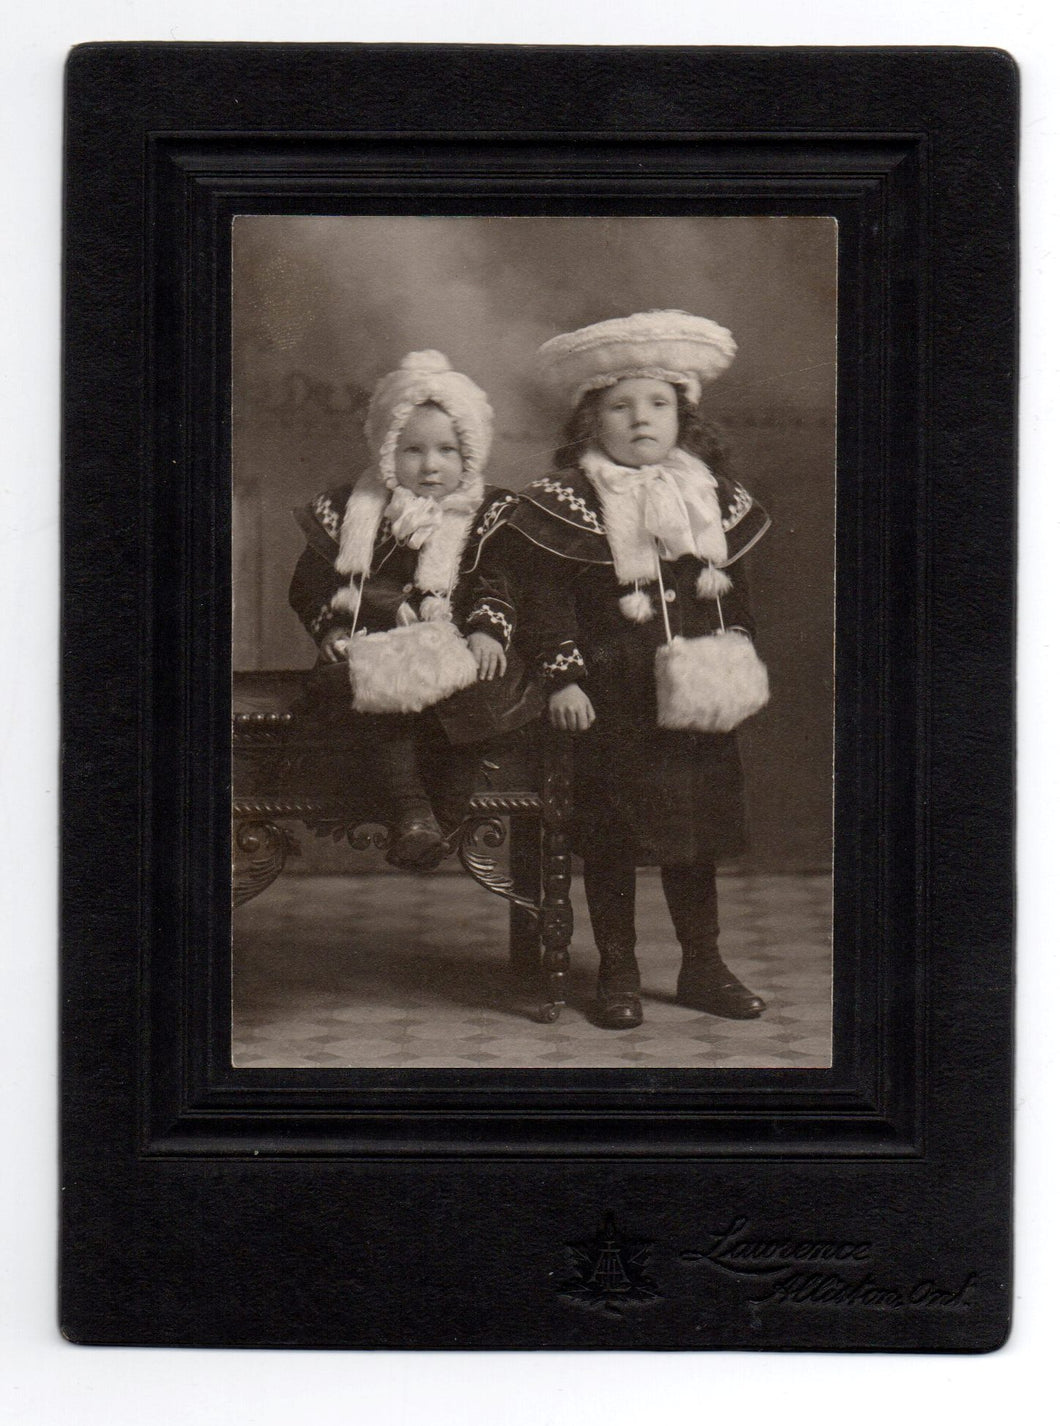 Photograph of two little girls